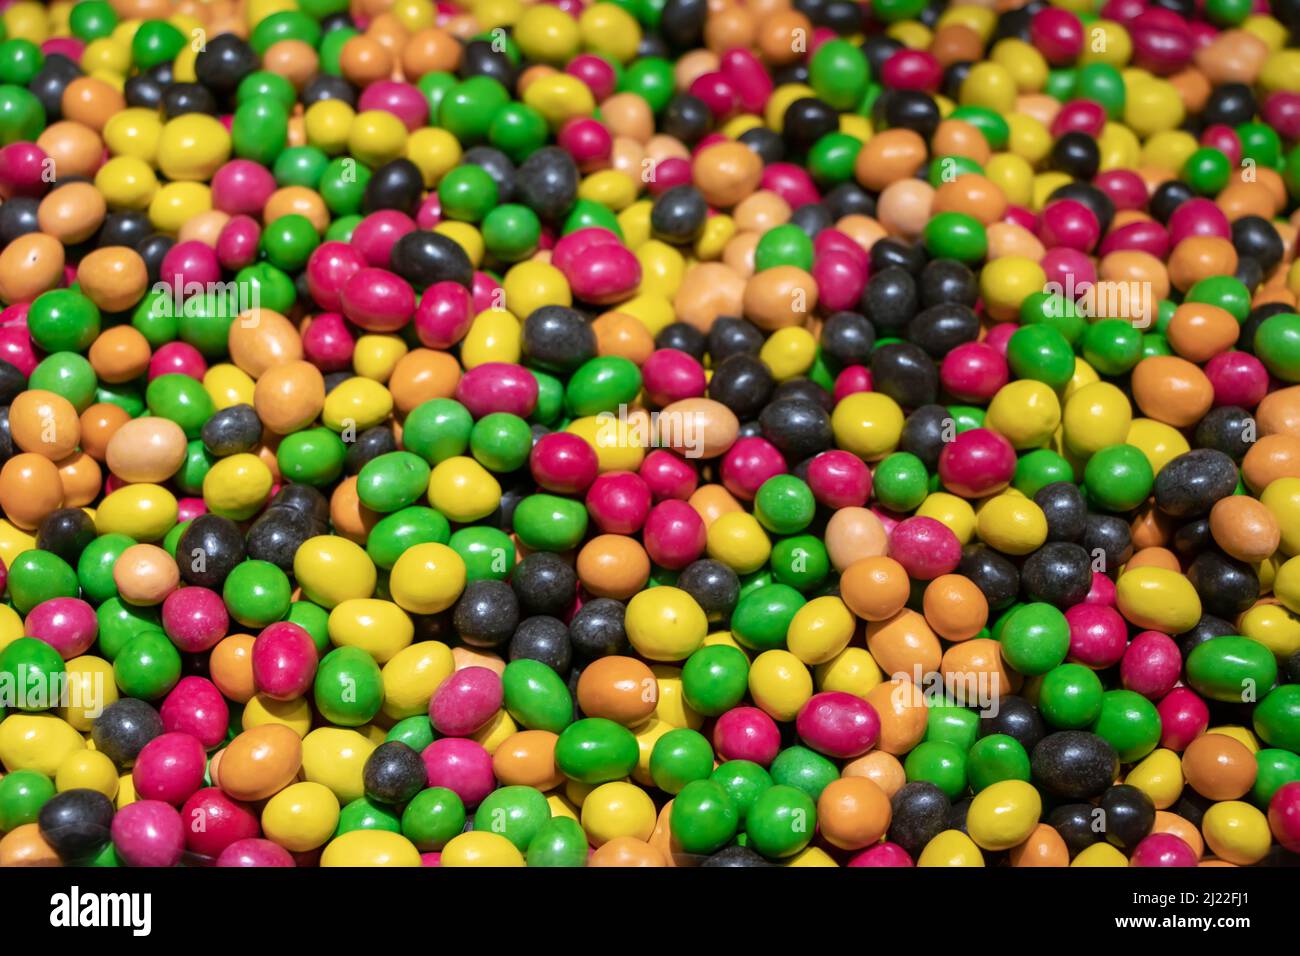 Multicolored jelly stick candies textured background. Stock Photo